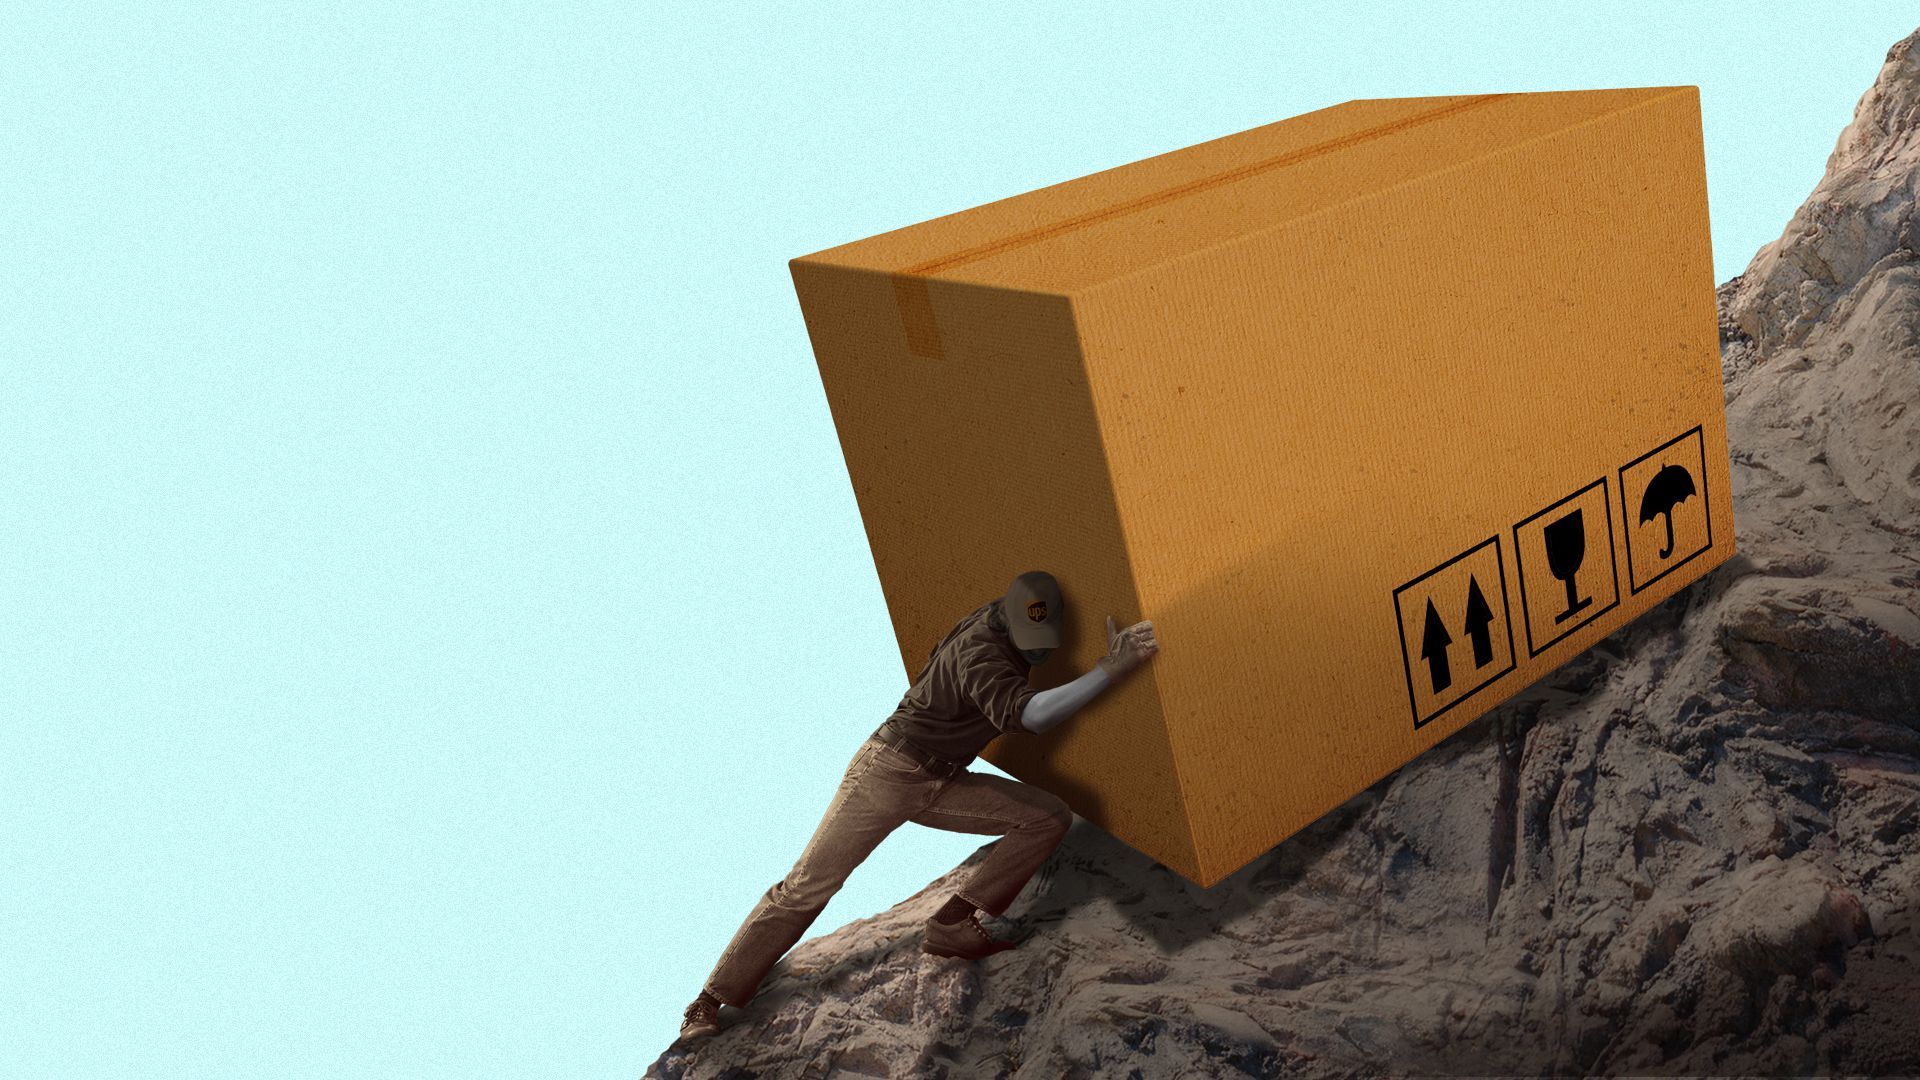 Illustration of a UPS delivery person pushing a giant box up a rocky hill